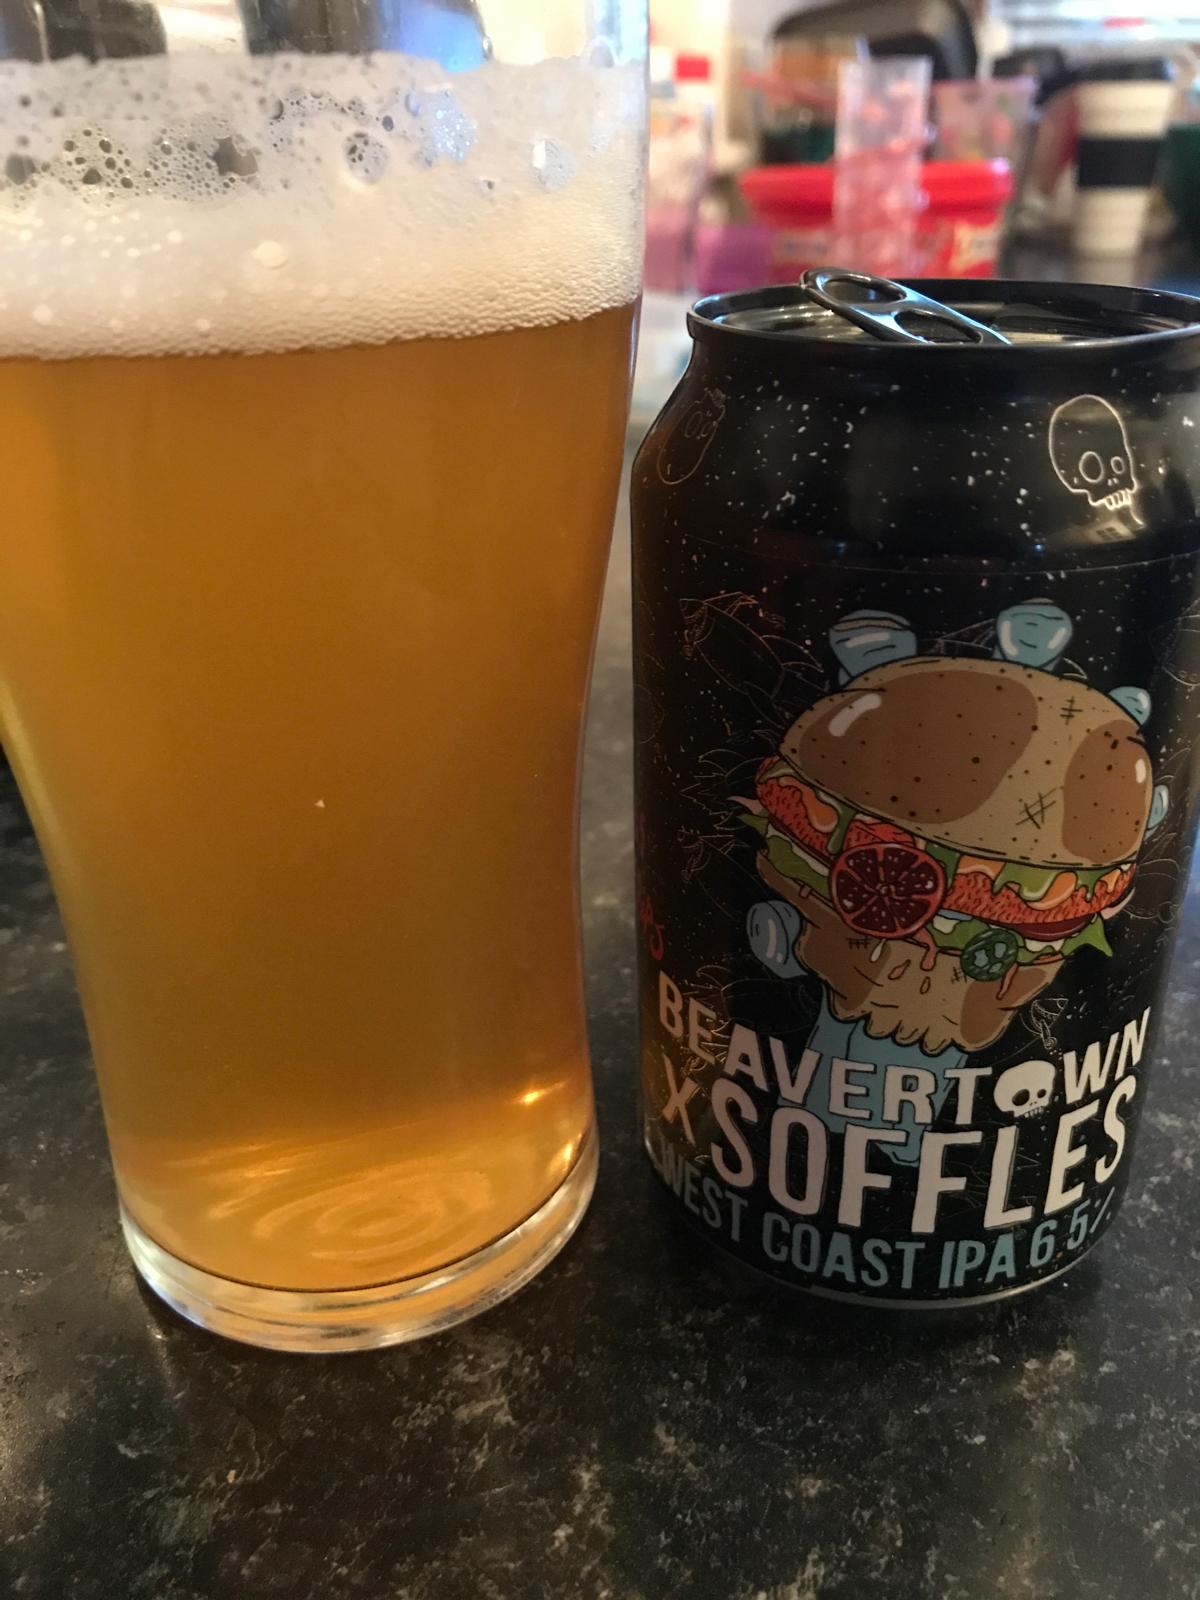 West Coast IPA (Collaboration with soffles)